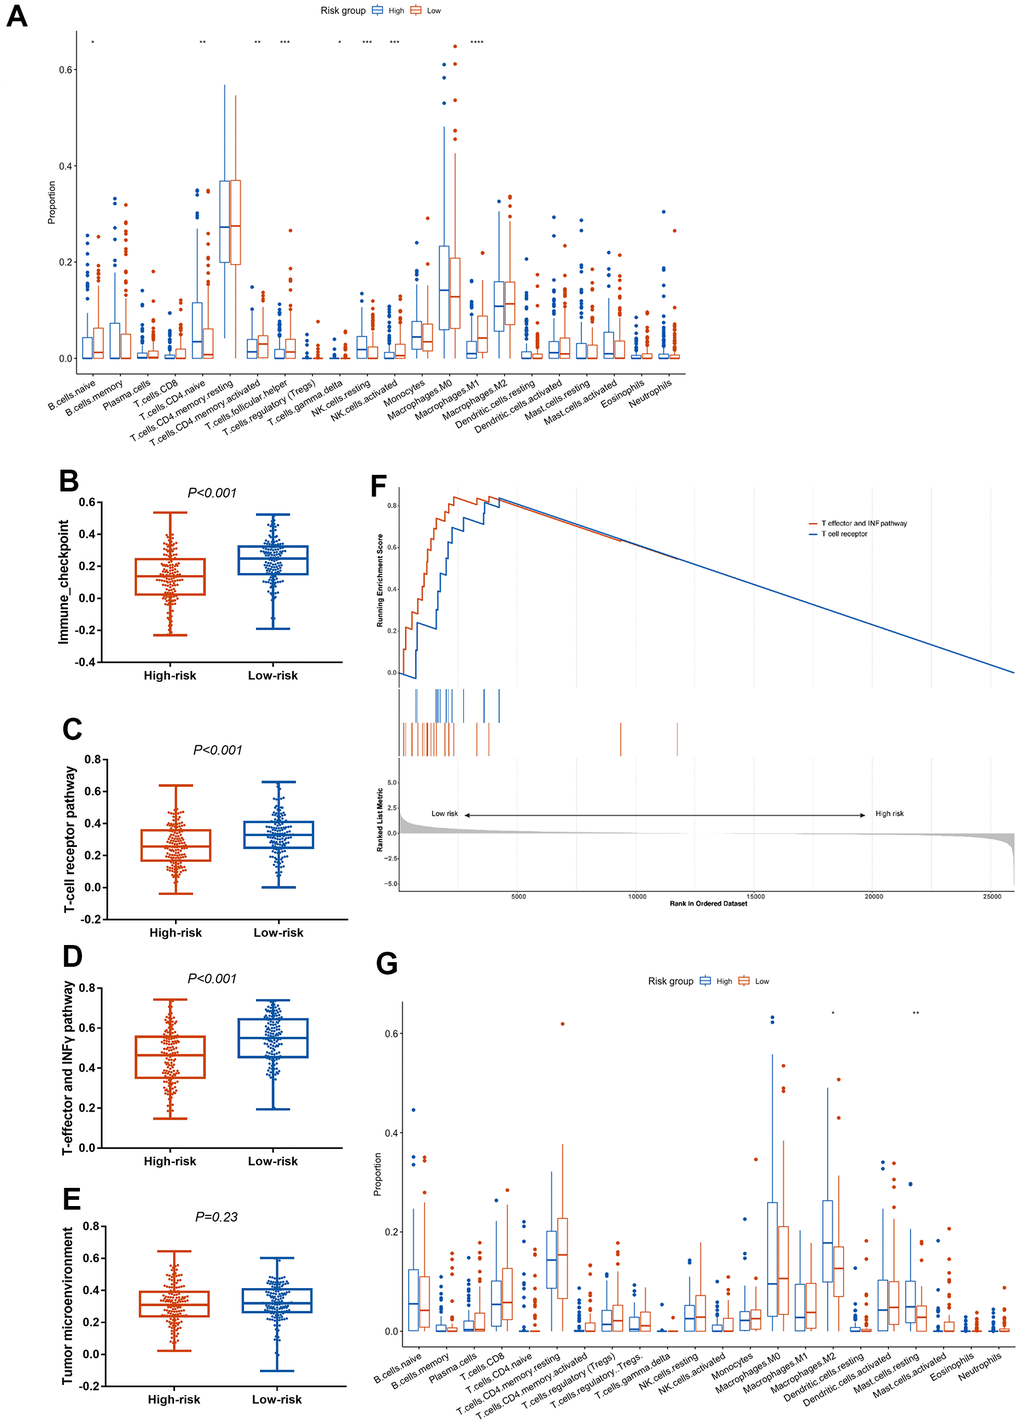 Association between the CCCP risk score and immune microenvironment in mUC and TCGA-BLCA cohort. (A) Comparison of immune cell infiltrations between patients with high- and low- risk score in mUC cohort. (B–E) Comparison of ssGSEA scores in immune checkpoint (B), T-cell receptor (C), T-effector and INF-γ (D) and tumor microenvironment (E) associated pathway between patients with high- and low-risk score. (F) GSEA enrichment analysis of T-cell receptor pathway and T-effector and INF-γ pathway in patients with high- and low-risk score. (G) Comparison of immune cell infiltrations between patients with high- and low- risk score in TCGA-BLCA cohort. mUC, metastatic urothelial carcinoma; CCCP, complement and coagulation cascades pathway; ssGSEA, single sample gene set enrichment analysis; GSEA, gene set enrichment analysis.